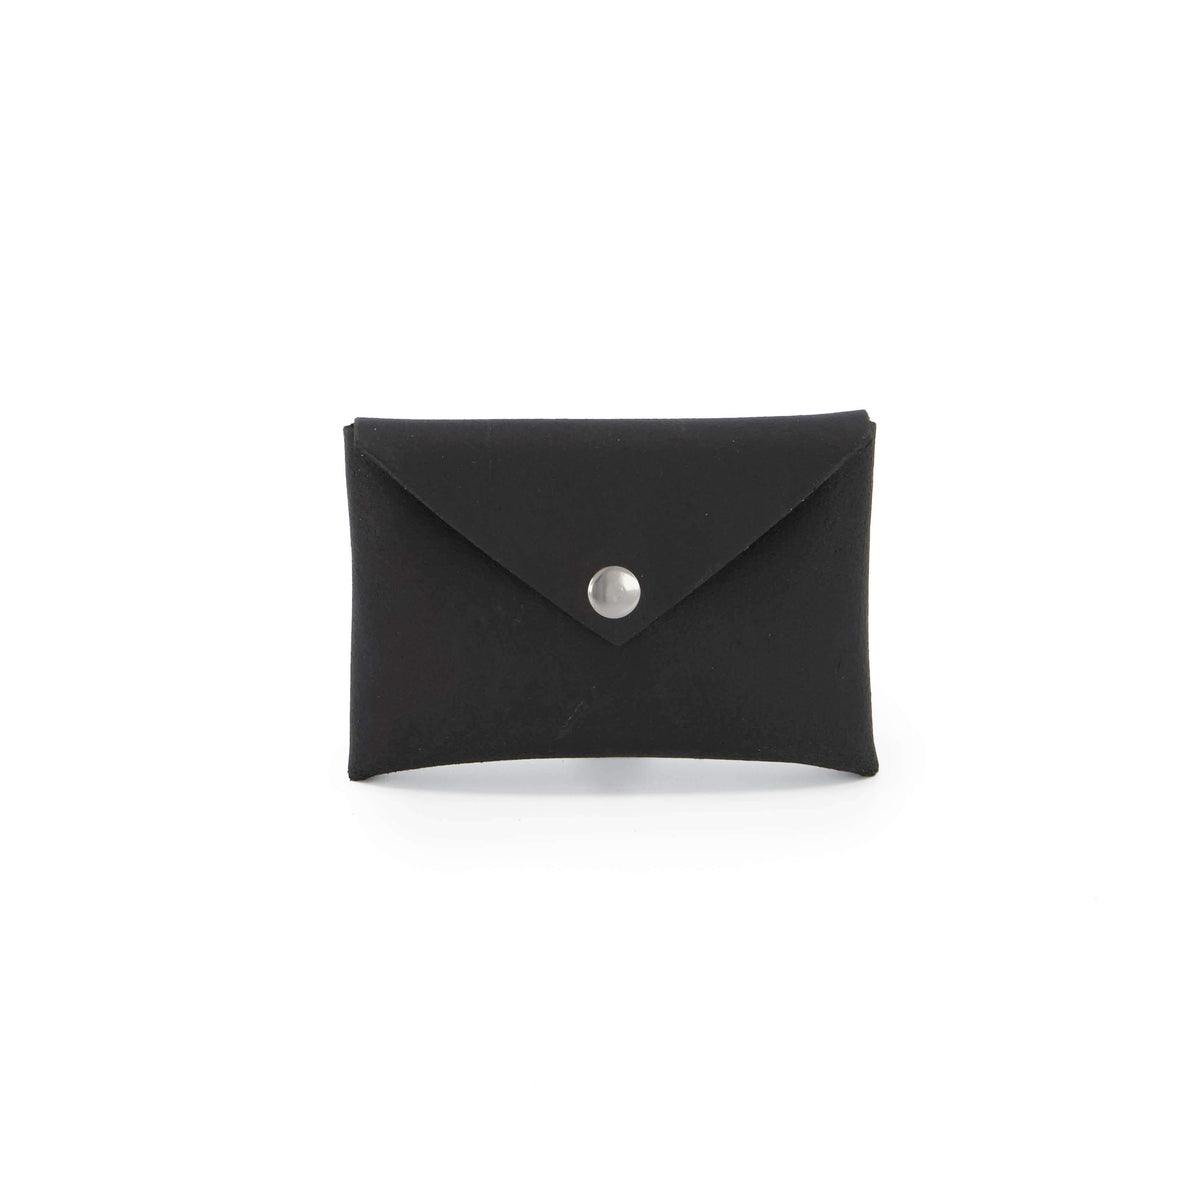 Small Leather Goods - Women Accessories